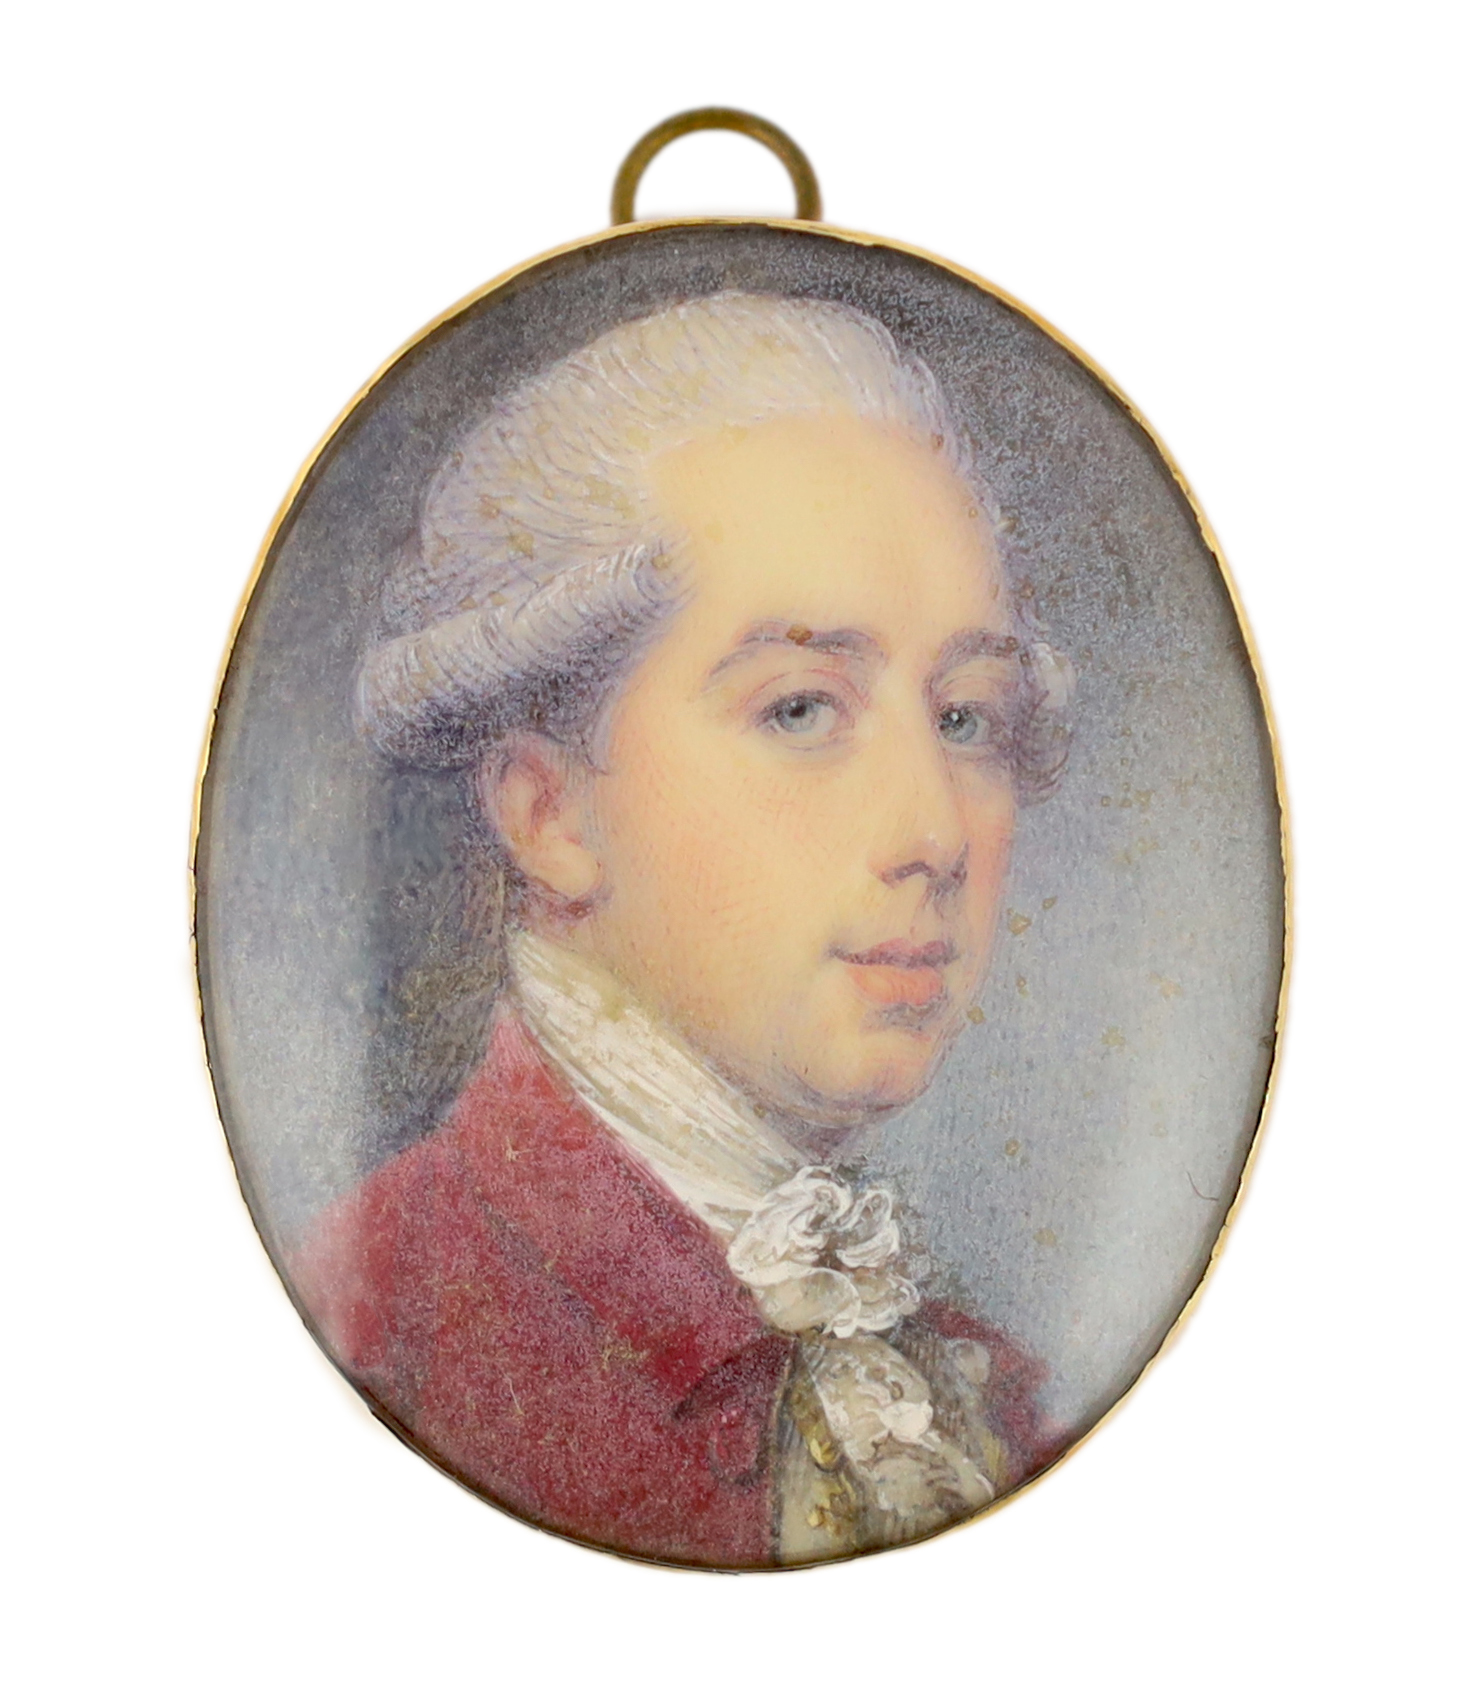 Jeremiah Meyer, R.A. (Anglo-German, 1735-1789), Portrait miniature of a gentleman, watercolour on ivory, 4 x 3.2cm. CITES Submission reference RNWC73XY